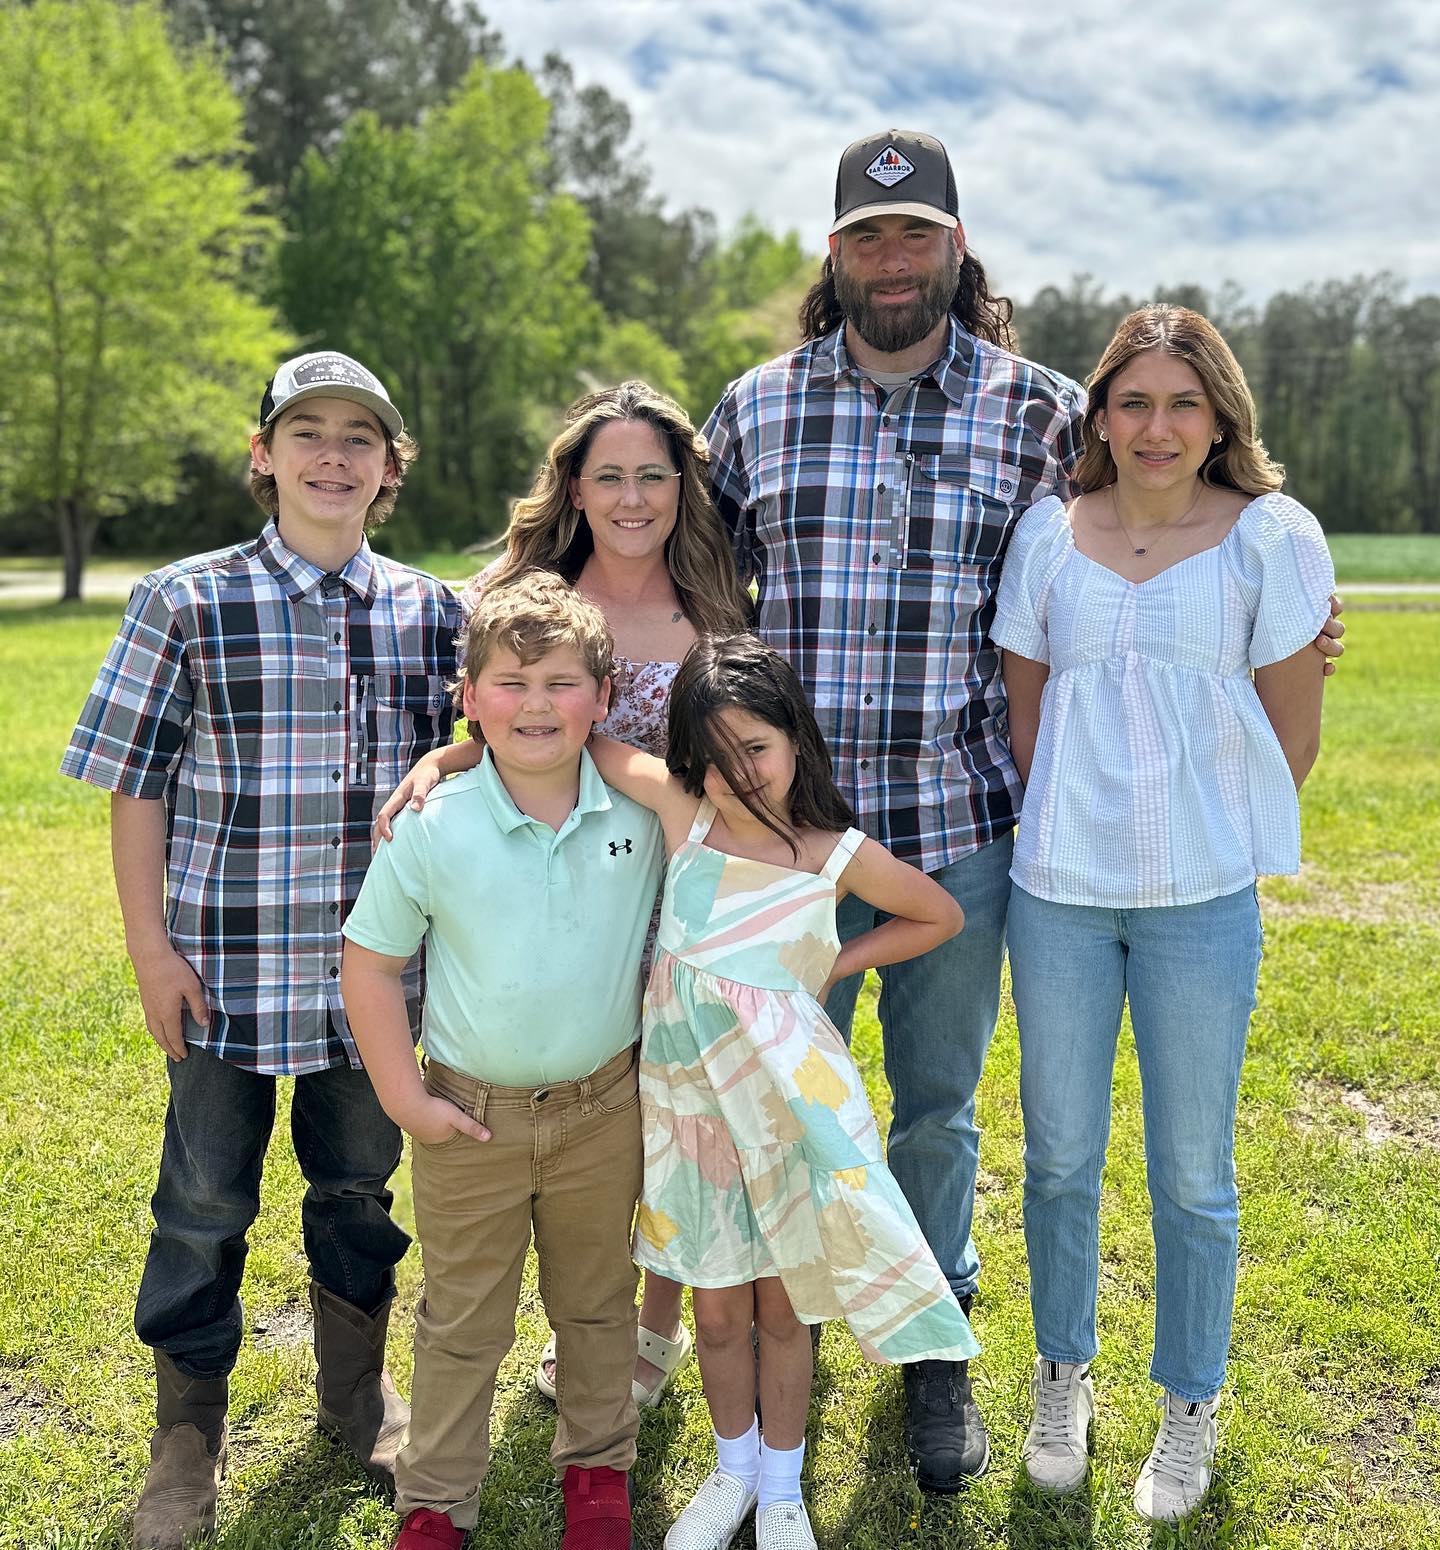 David posed with Maryssa Eason, wife Jenelle, and the other children